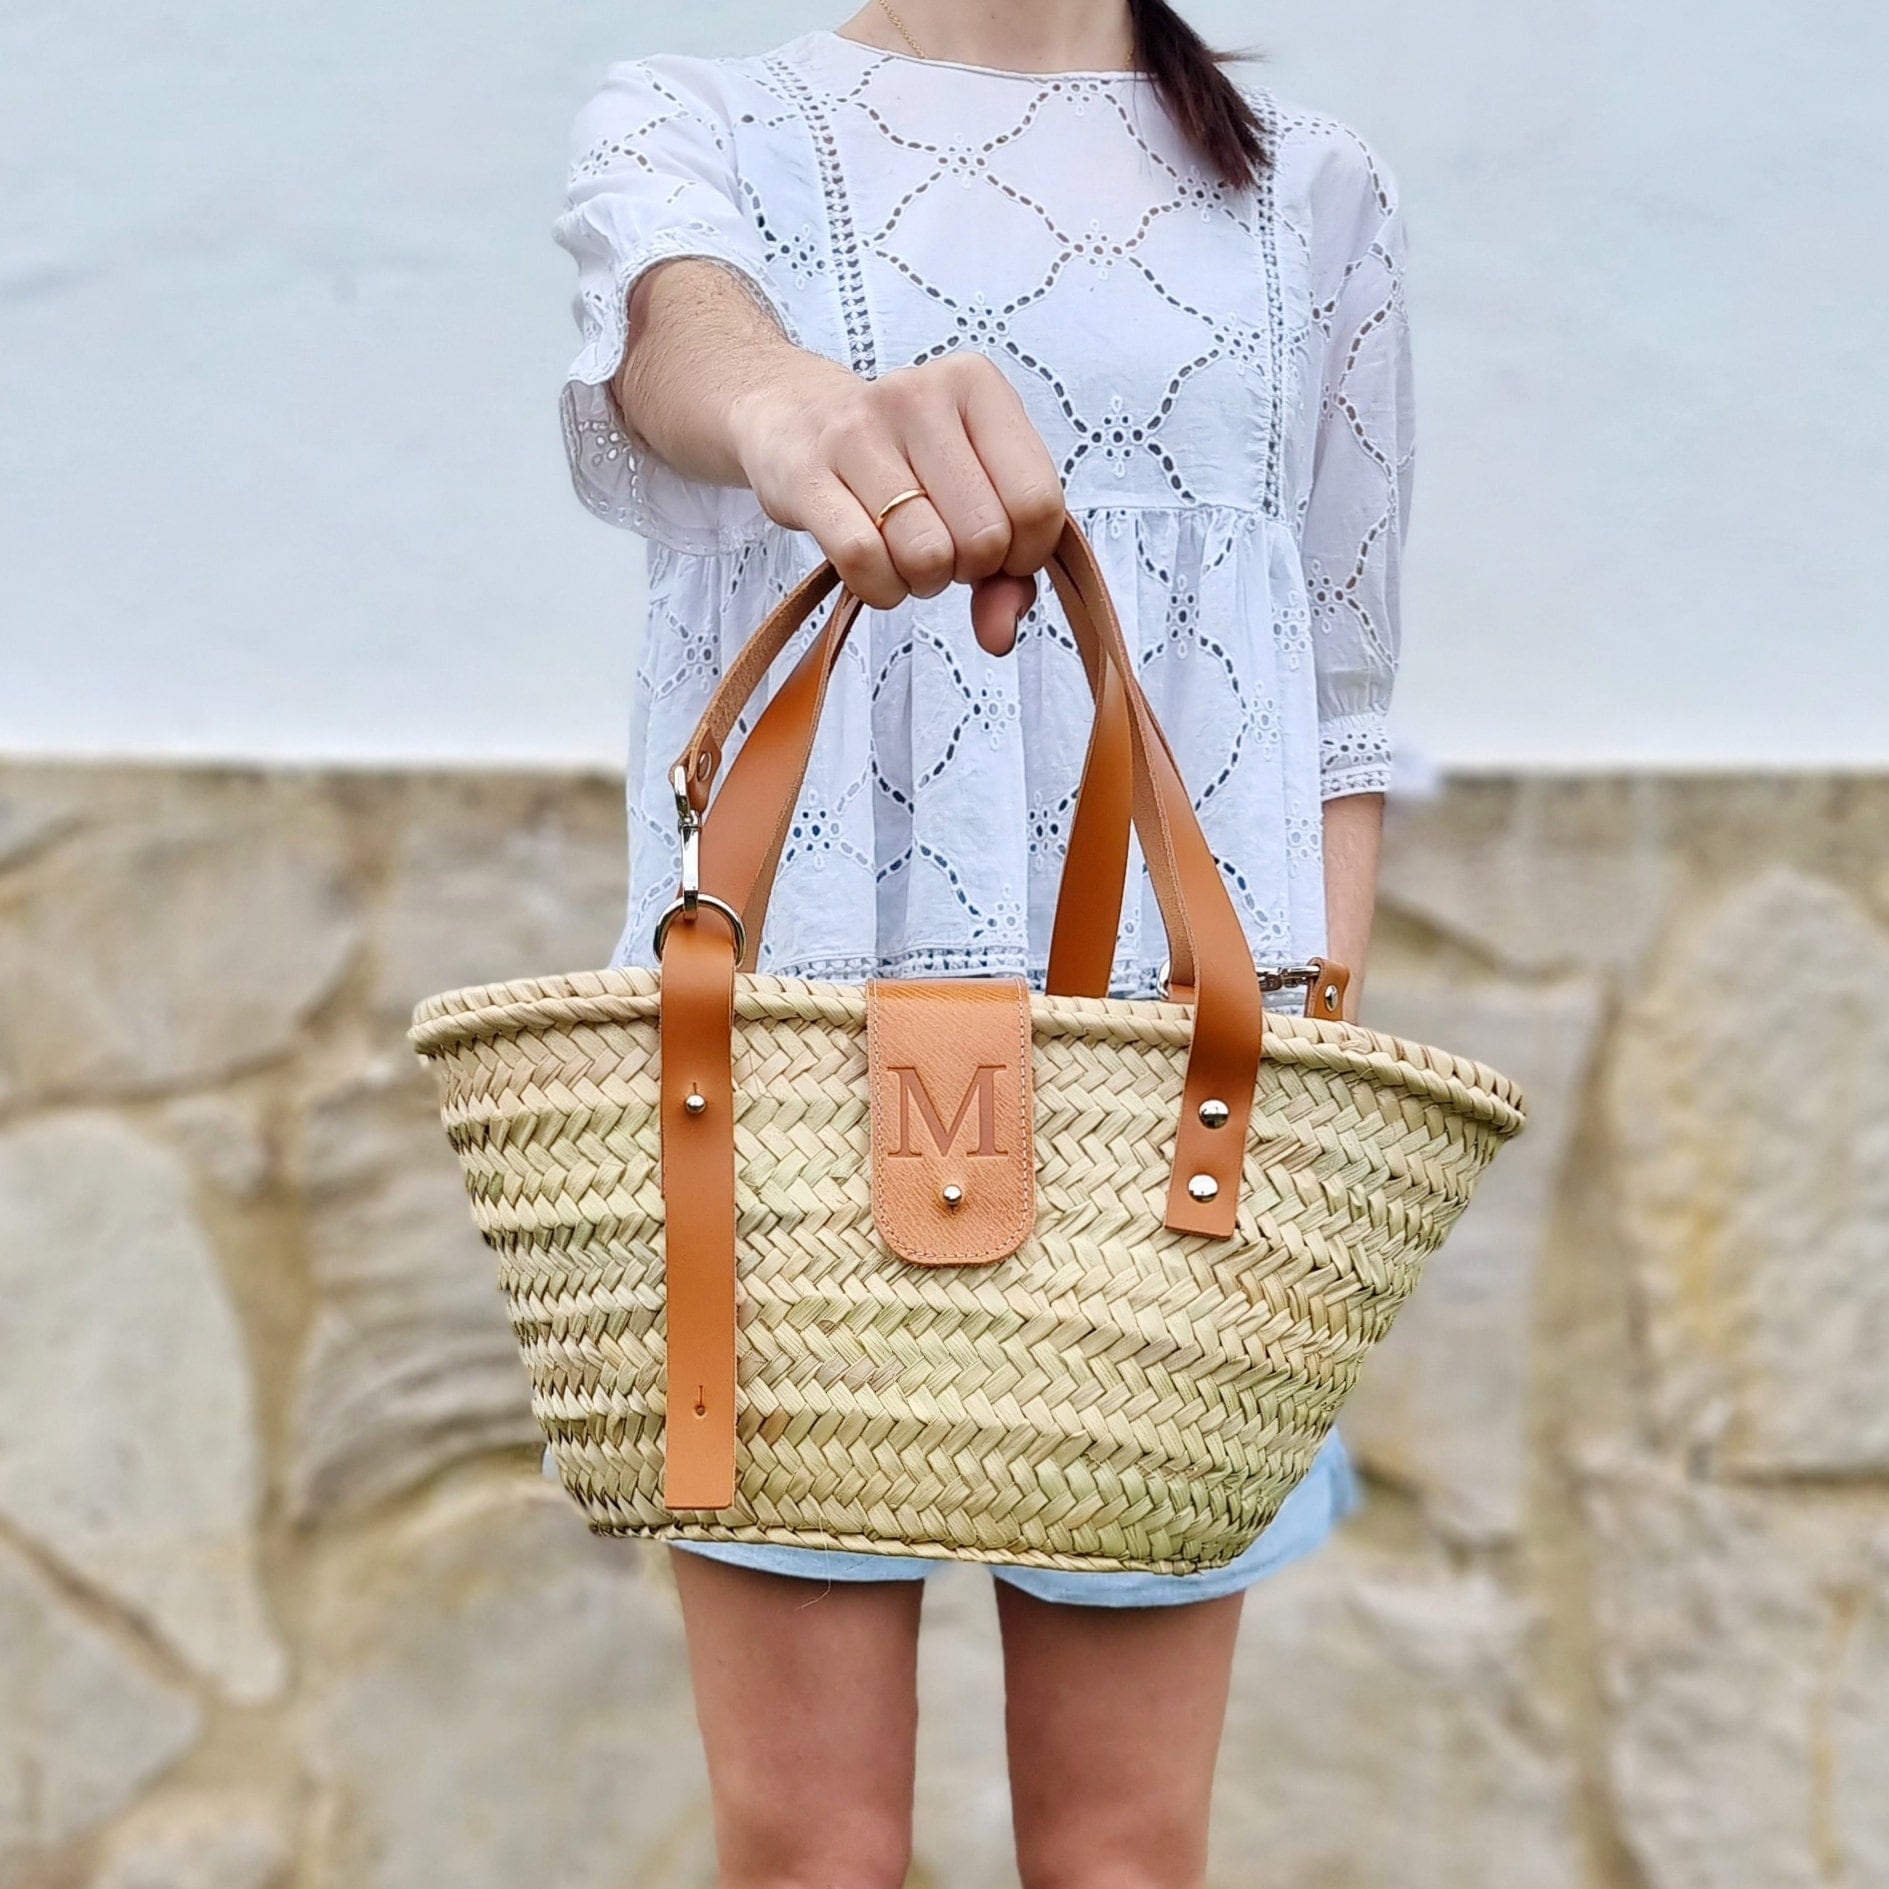 Top more than 77 cute straw bags - in.cdgdbentre